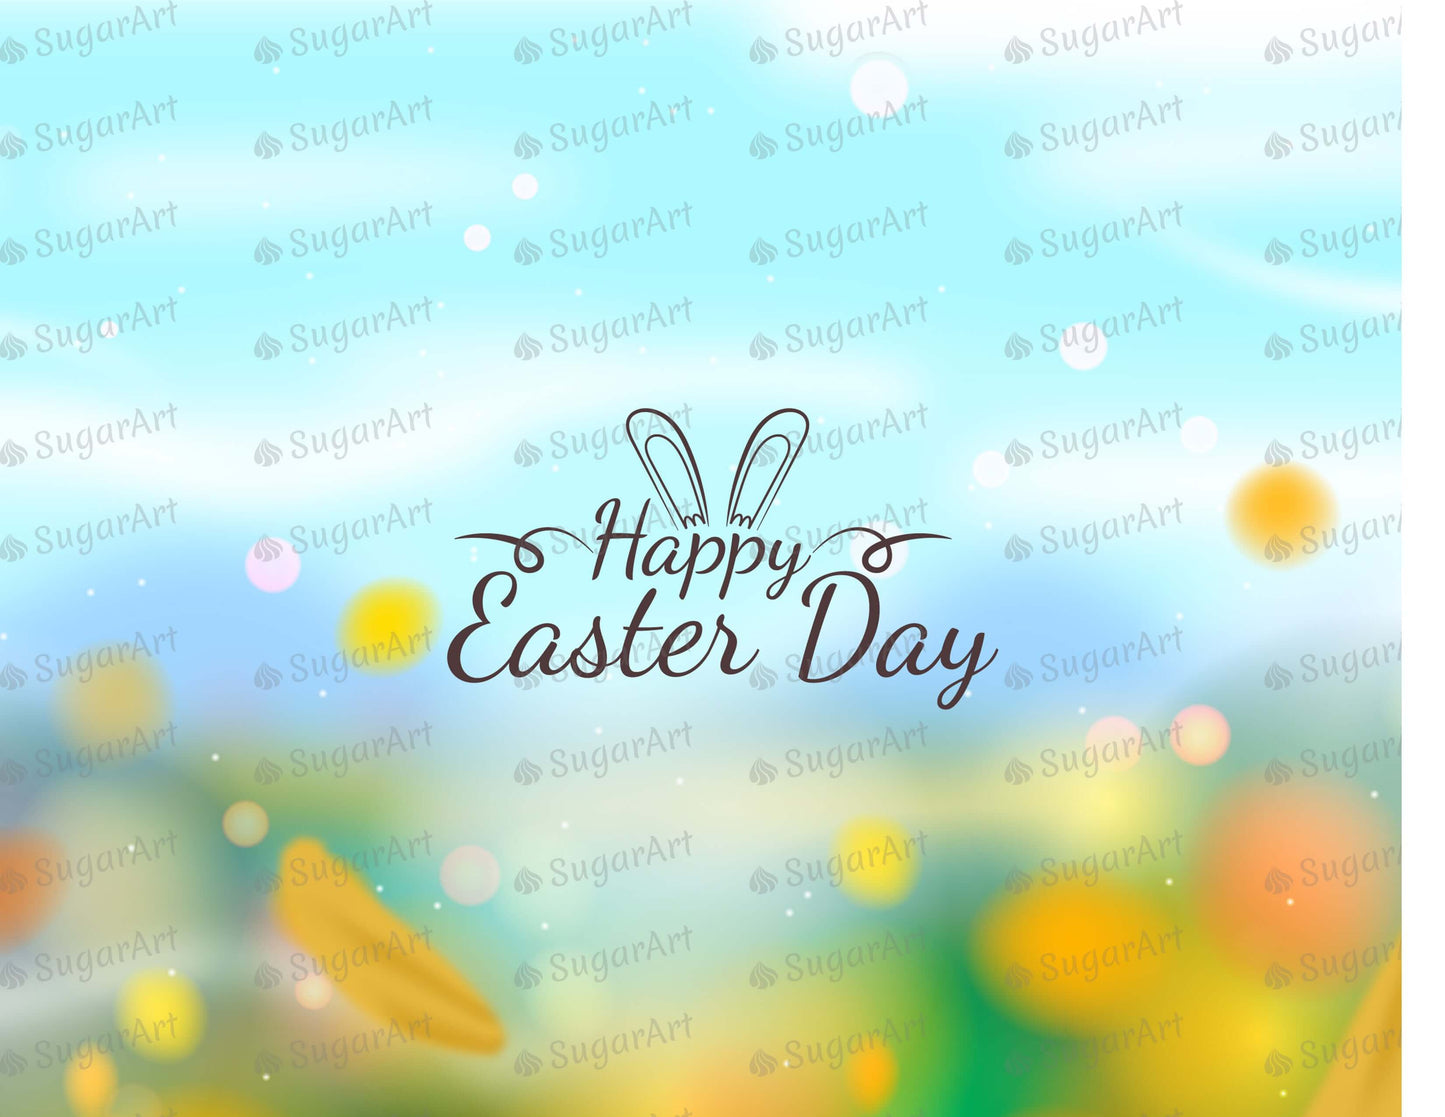 Happy Easter Day on Blurred Leaves Background  - Icing - ISA237.